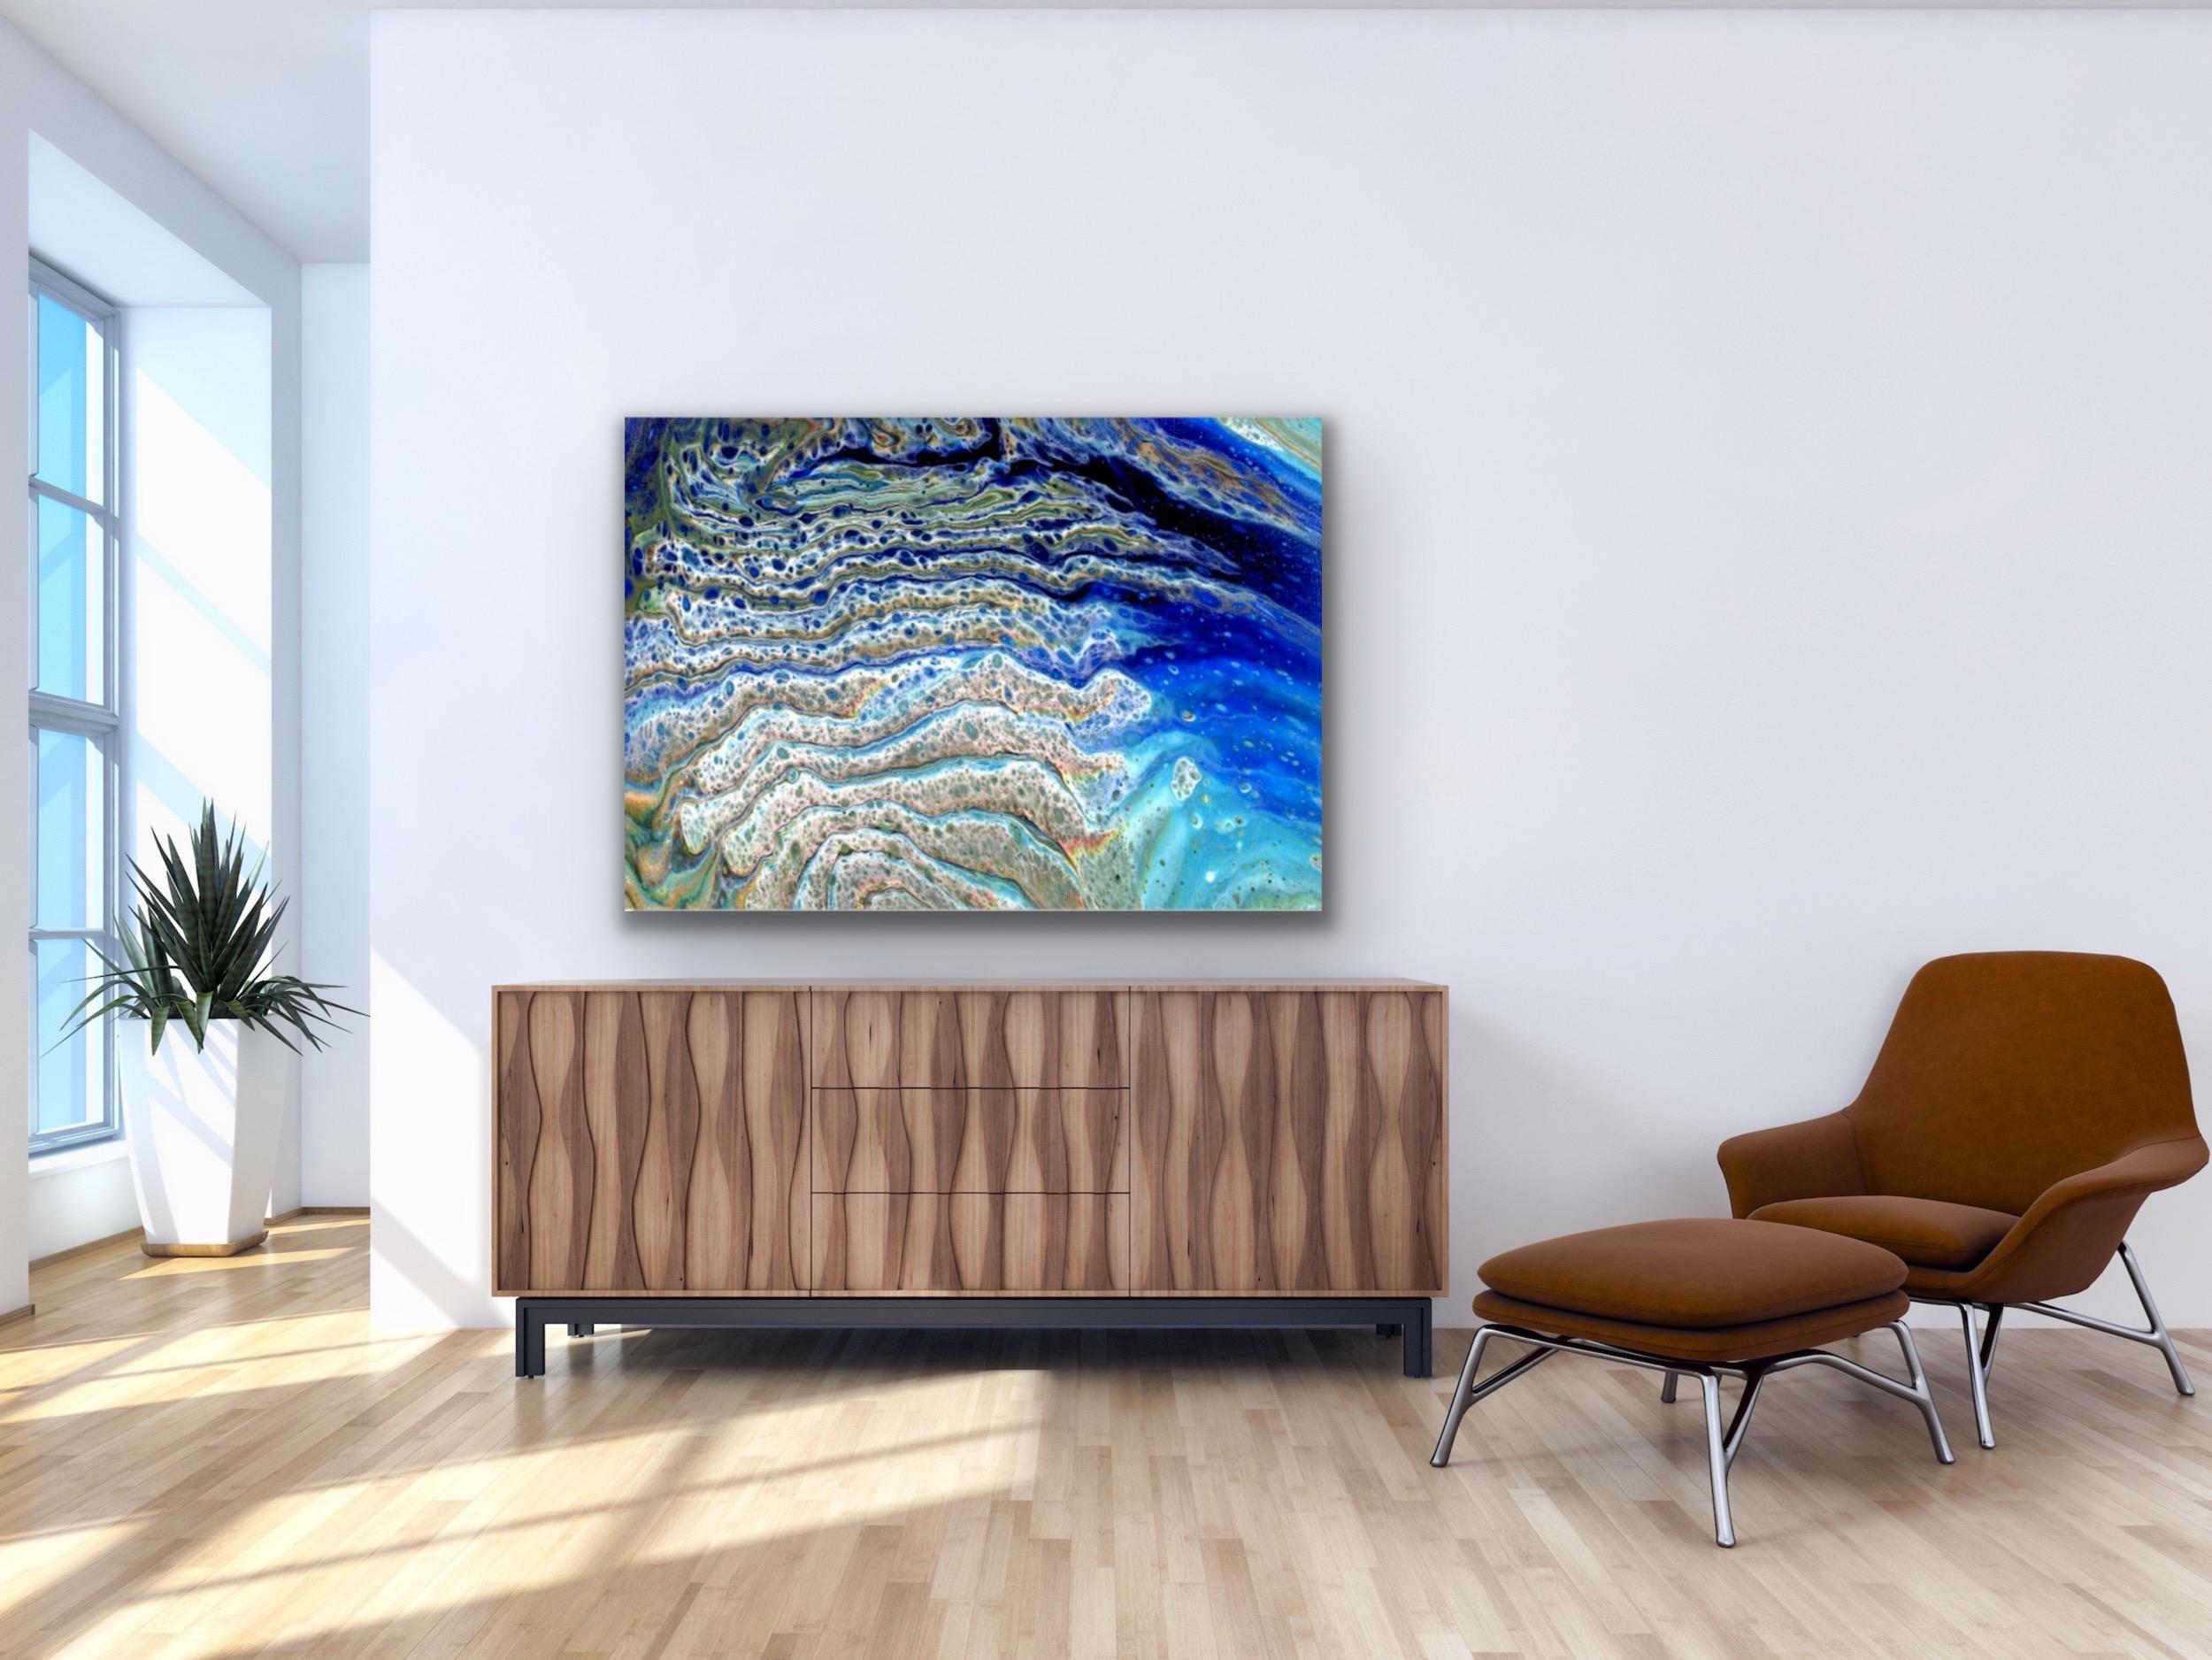 This is a limited edition print of Celeste Reiter's original painting and is signed by the artist. Printed on lightweight metal composite, your artwork comes ready to hang. This vibrant composition can be hung both indoor and outdoor as it is